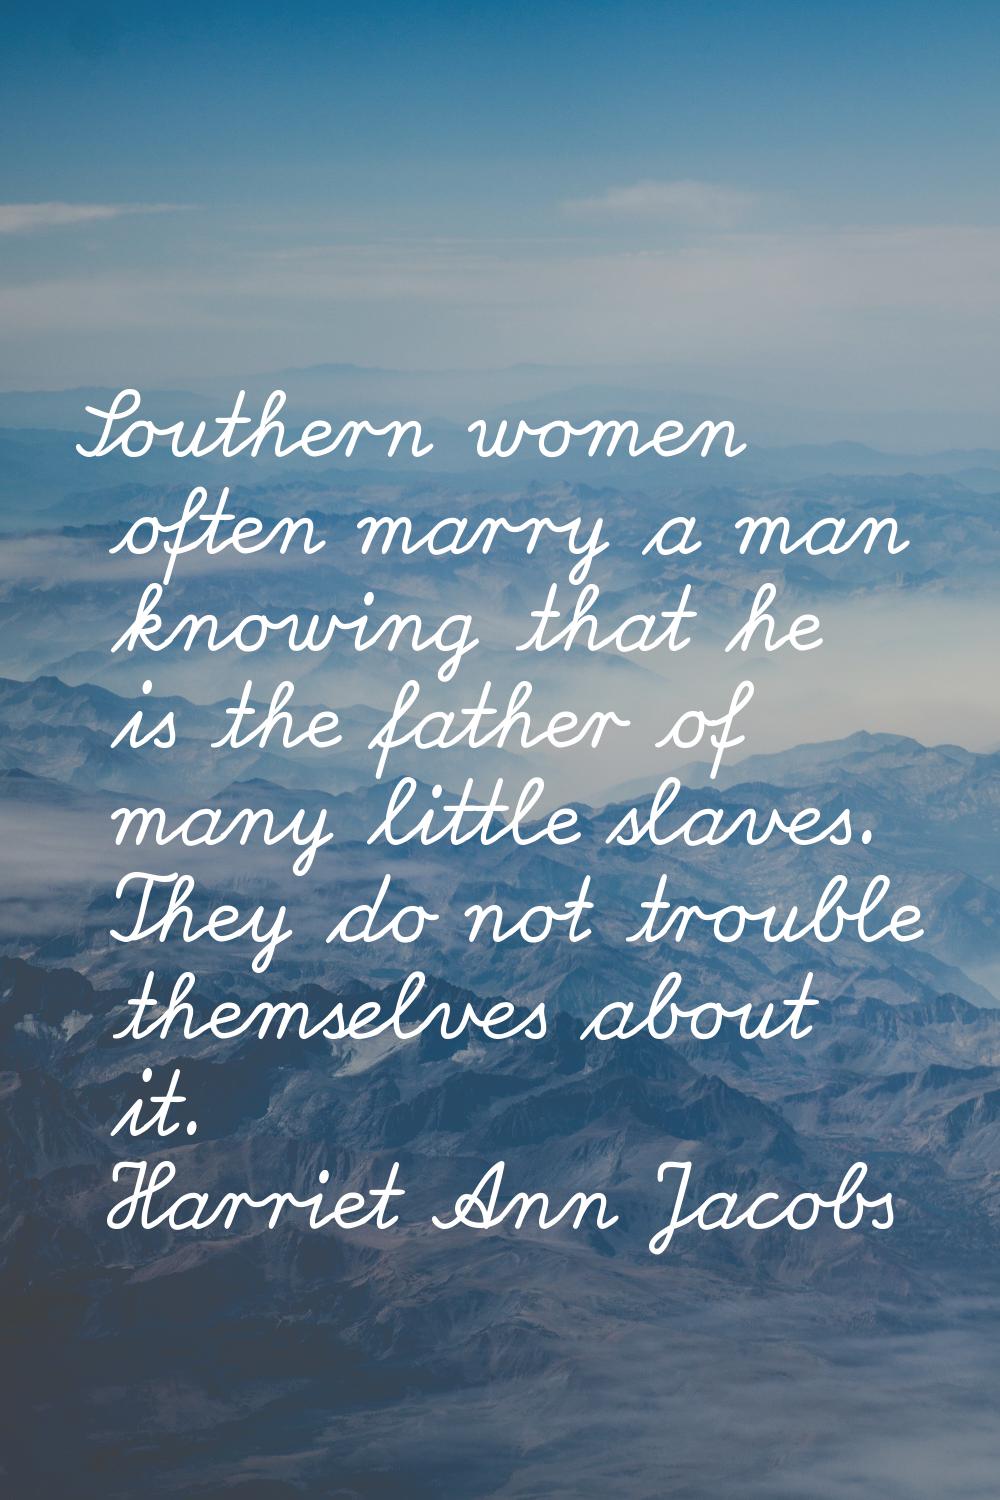 Southern women often marry a man knowing that he is the father of many little slaves. They do not t